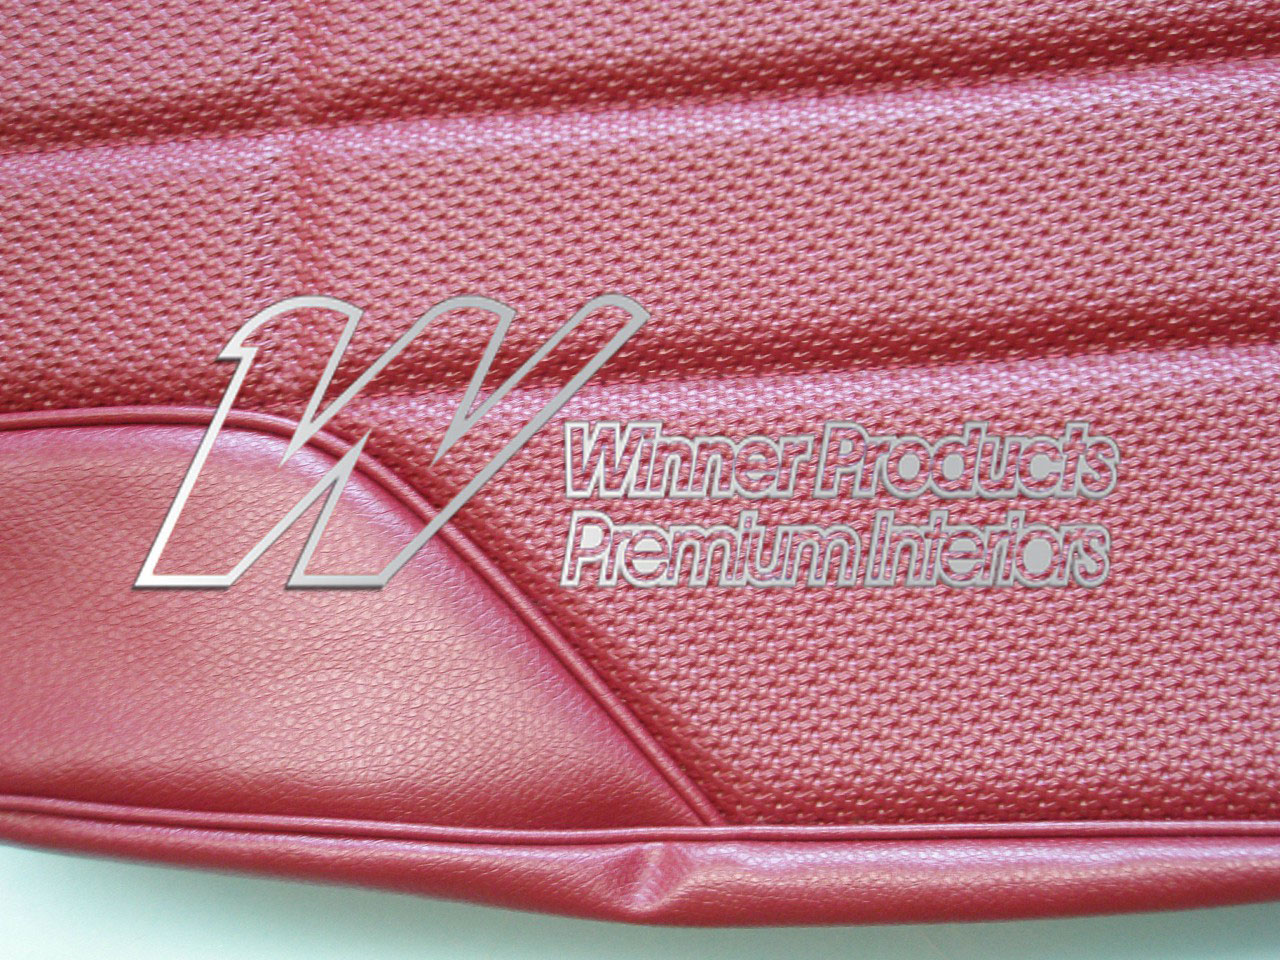 Holden Monaro HT Monaro GTS Coupe 12X Morocco Red Seat Covers (Image 6 of 6)